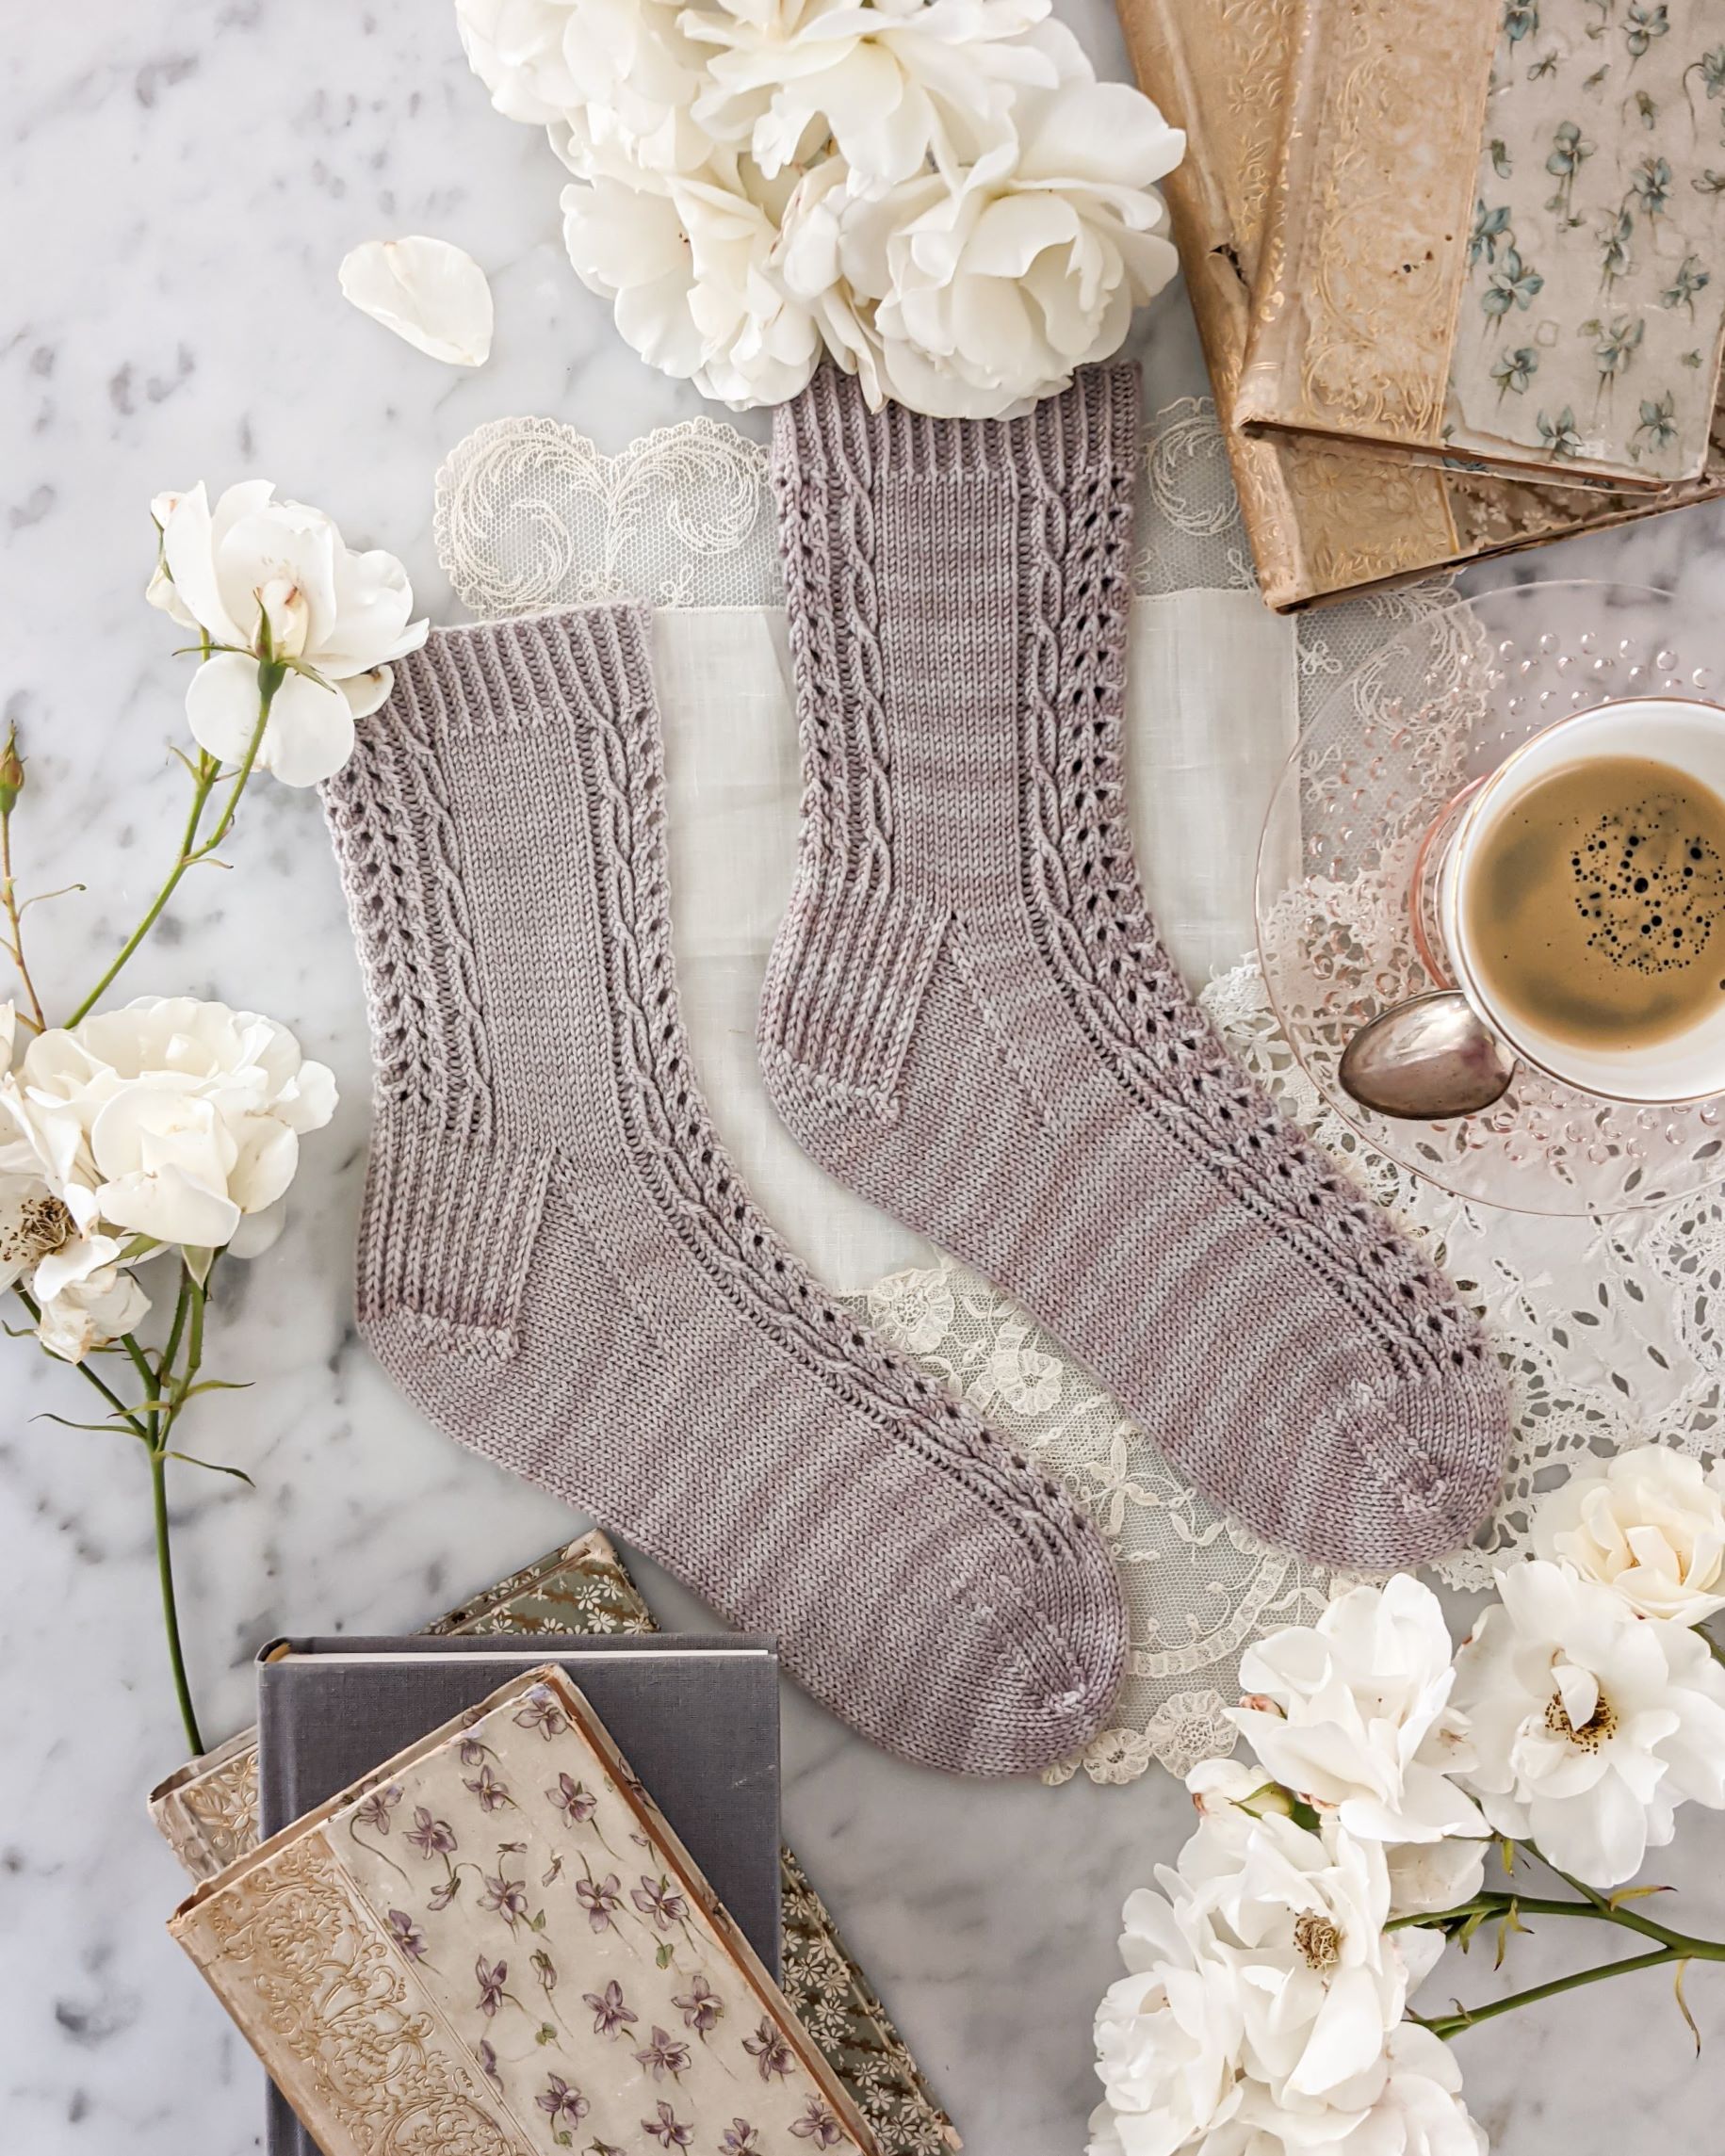 A top-down image of the Lucida Socks, a pair of lavender-colored socks with panels of eyelets and cables running down front and back, modeled on a pair of sock blockers and laid flat on a white marble background surrounded by antique books, which roses, and a teacup full of espresso